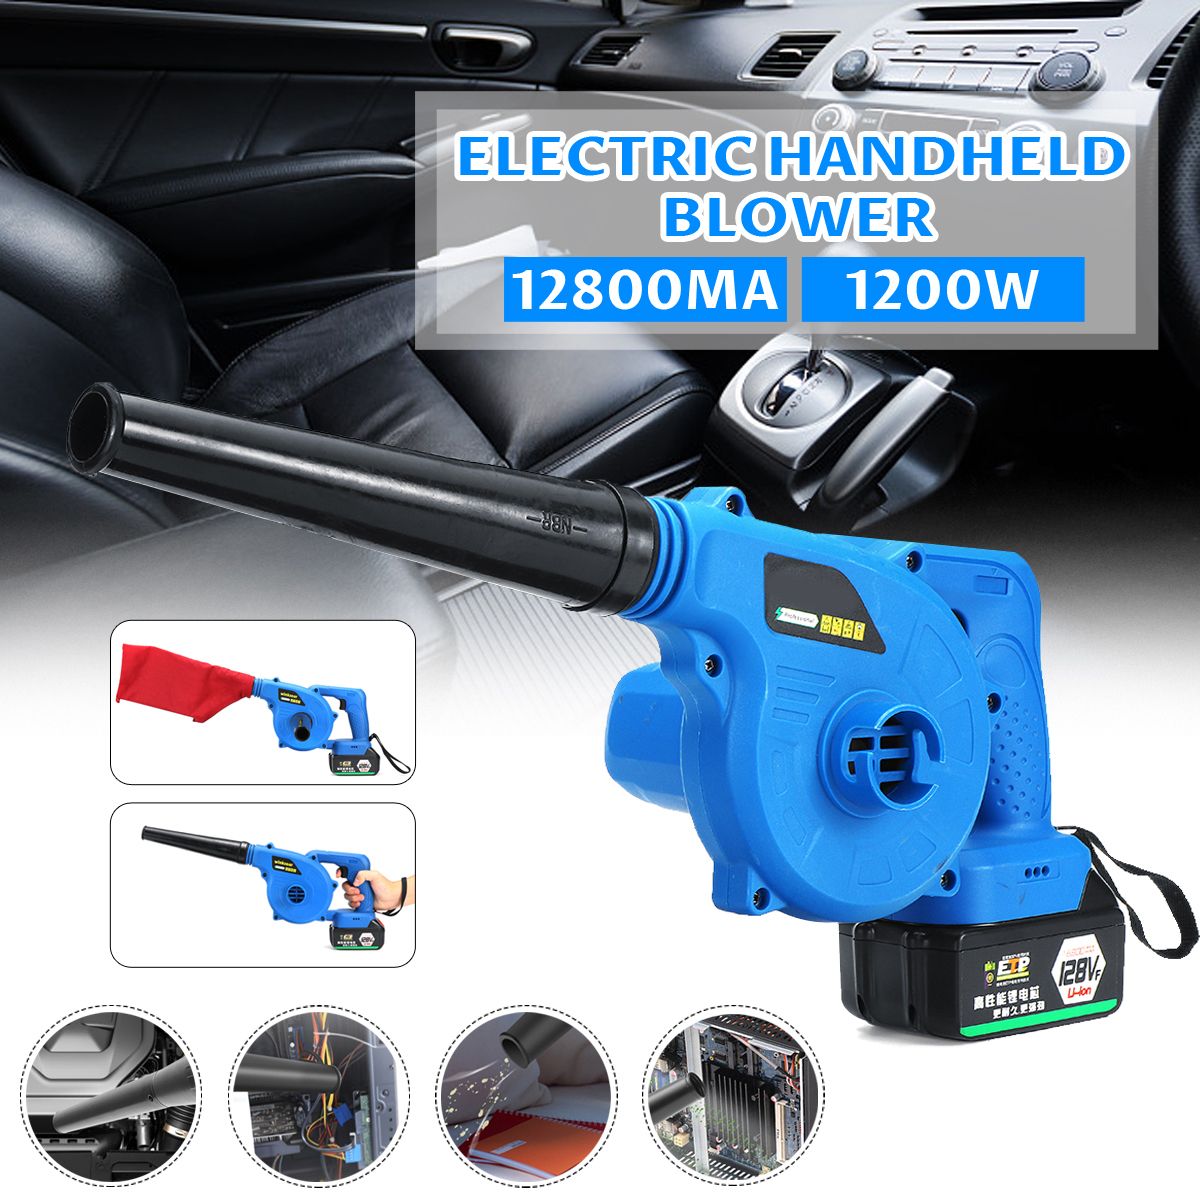 220v-1200W-Electric-Wireless-Handheld-Blower-Computer-Dust-Collector-Rechargeable-Lithium-One-Batter-1562214